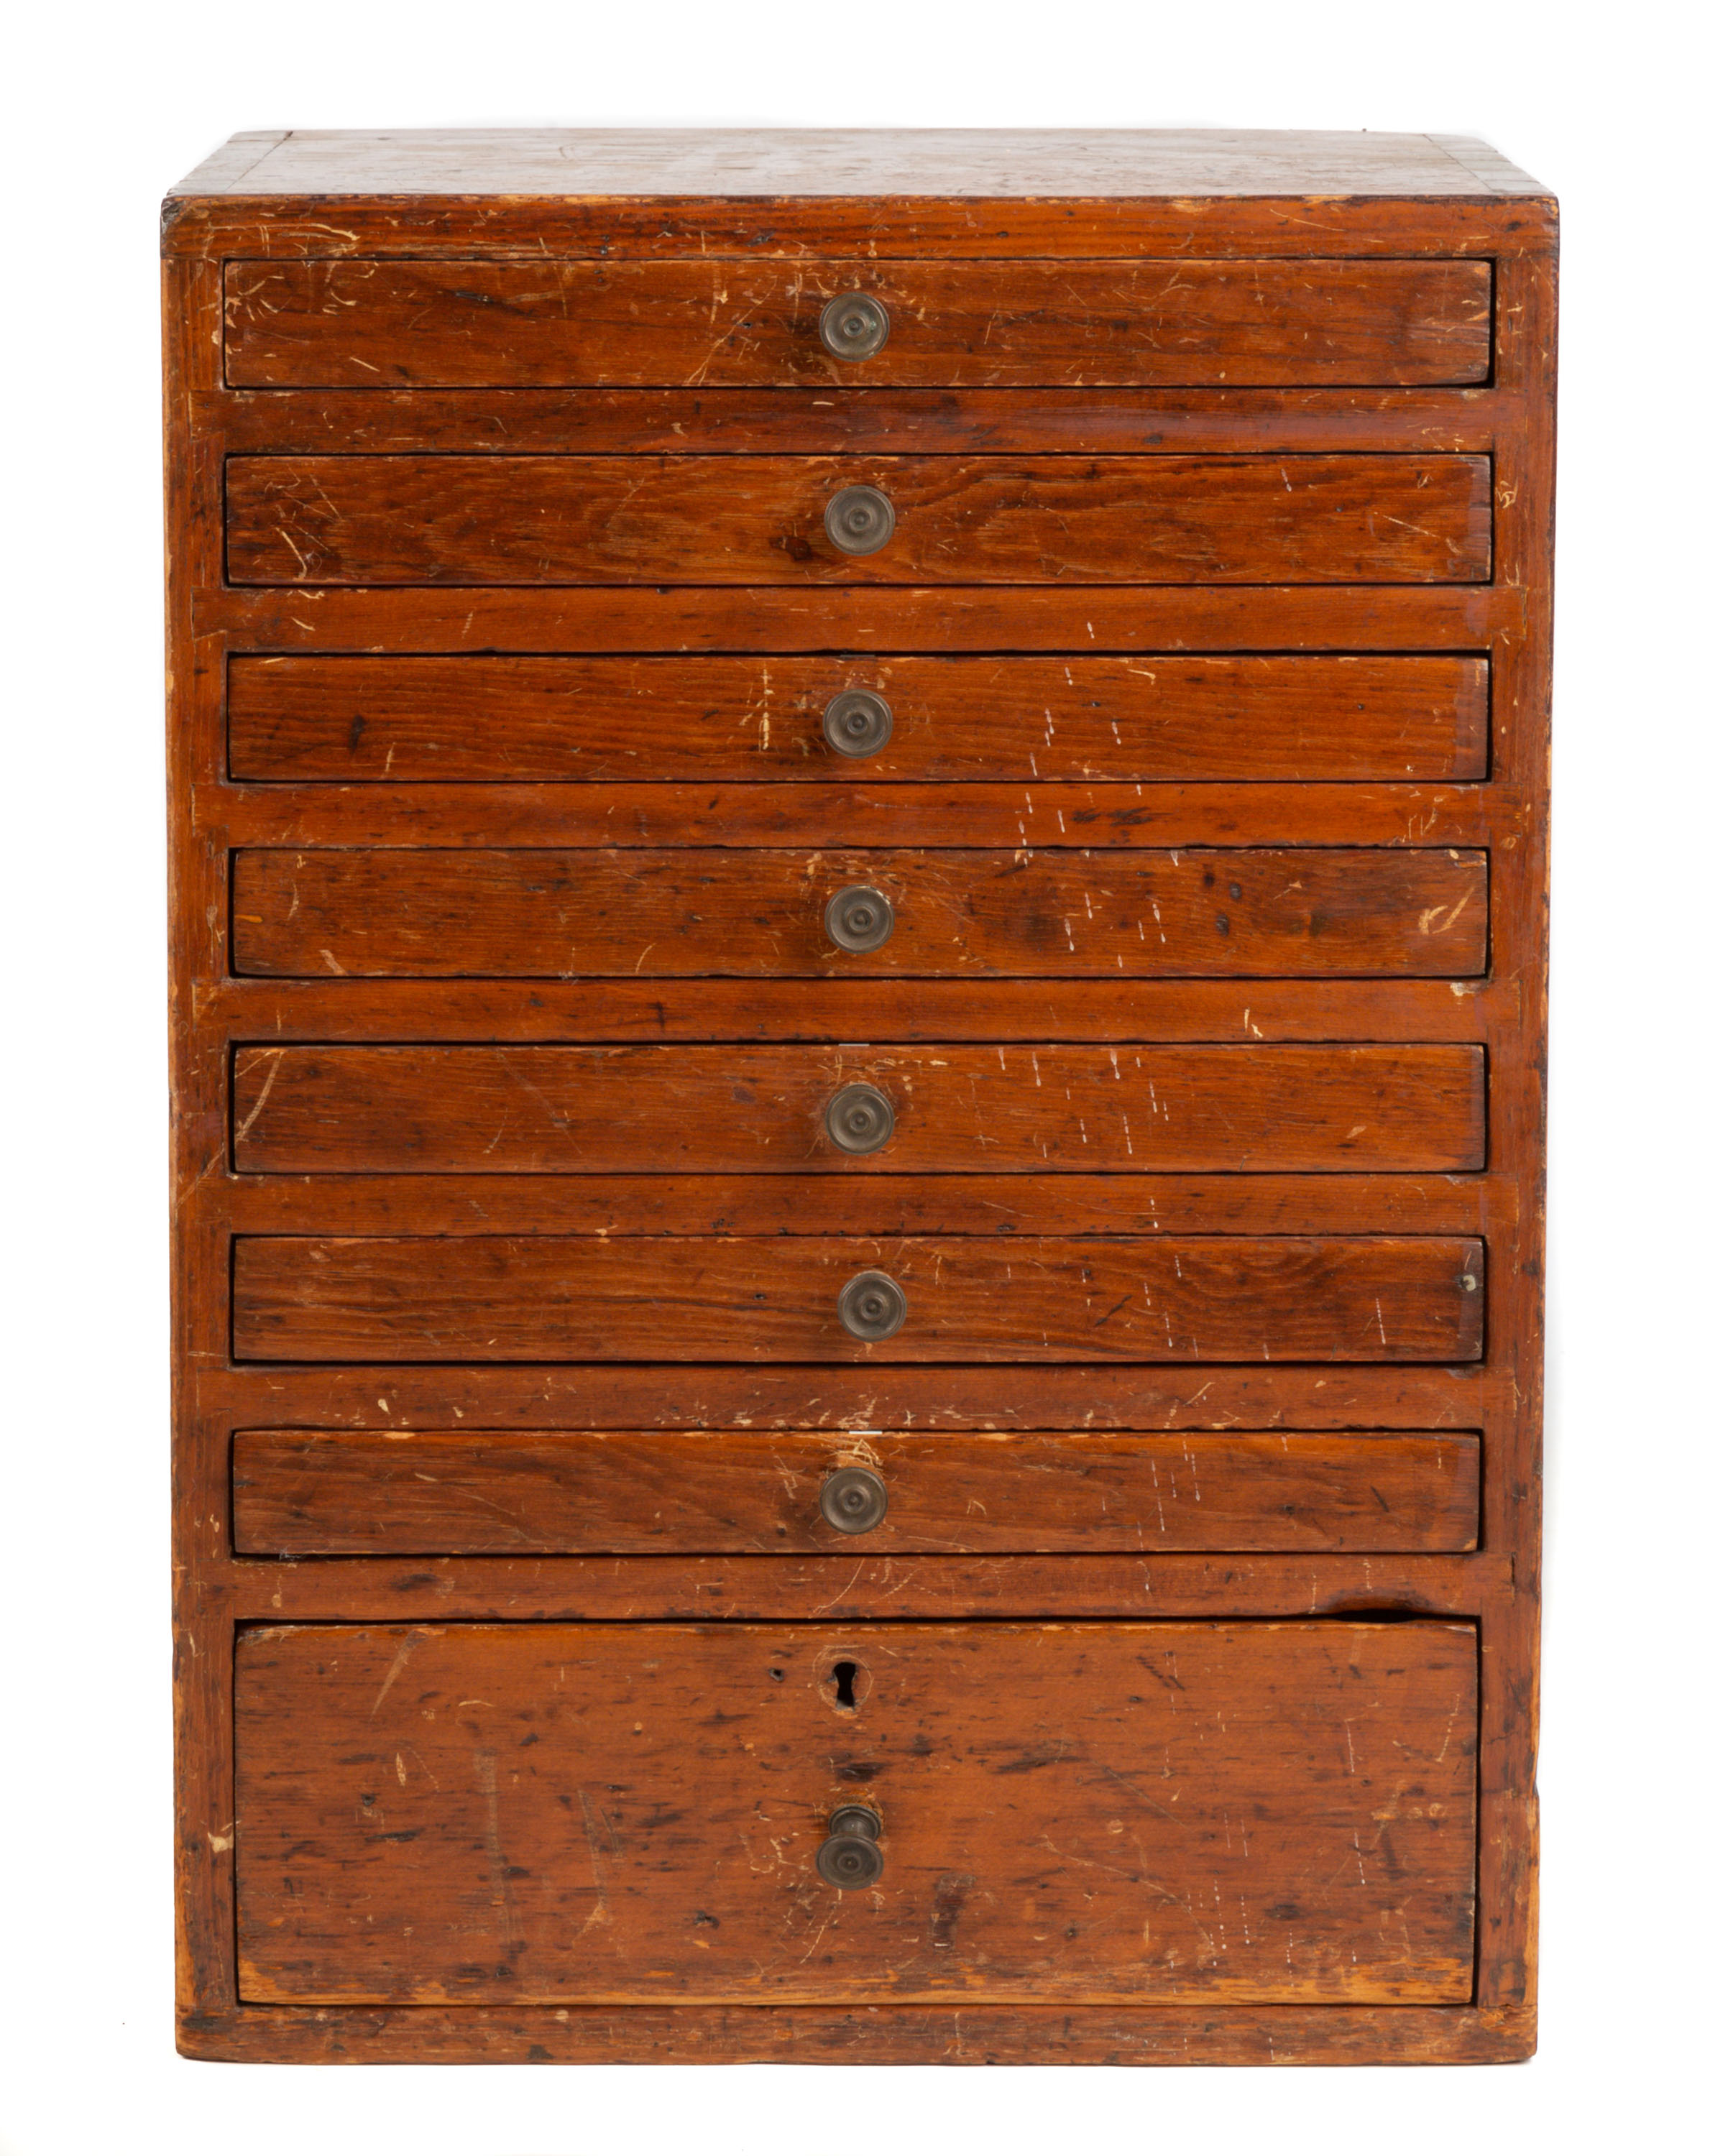 AMERICAN PINE DRAWER UNIT Early